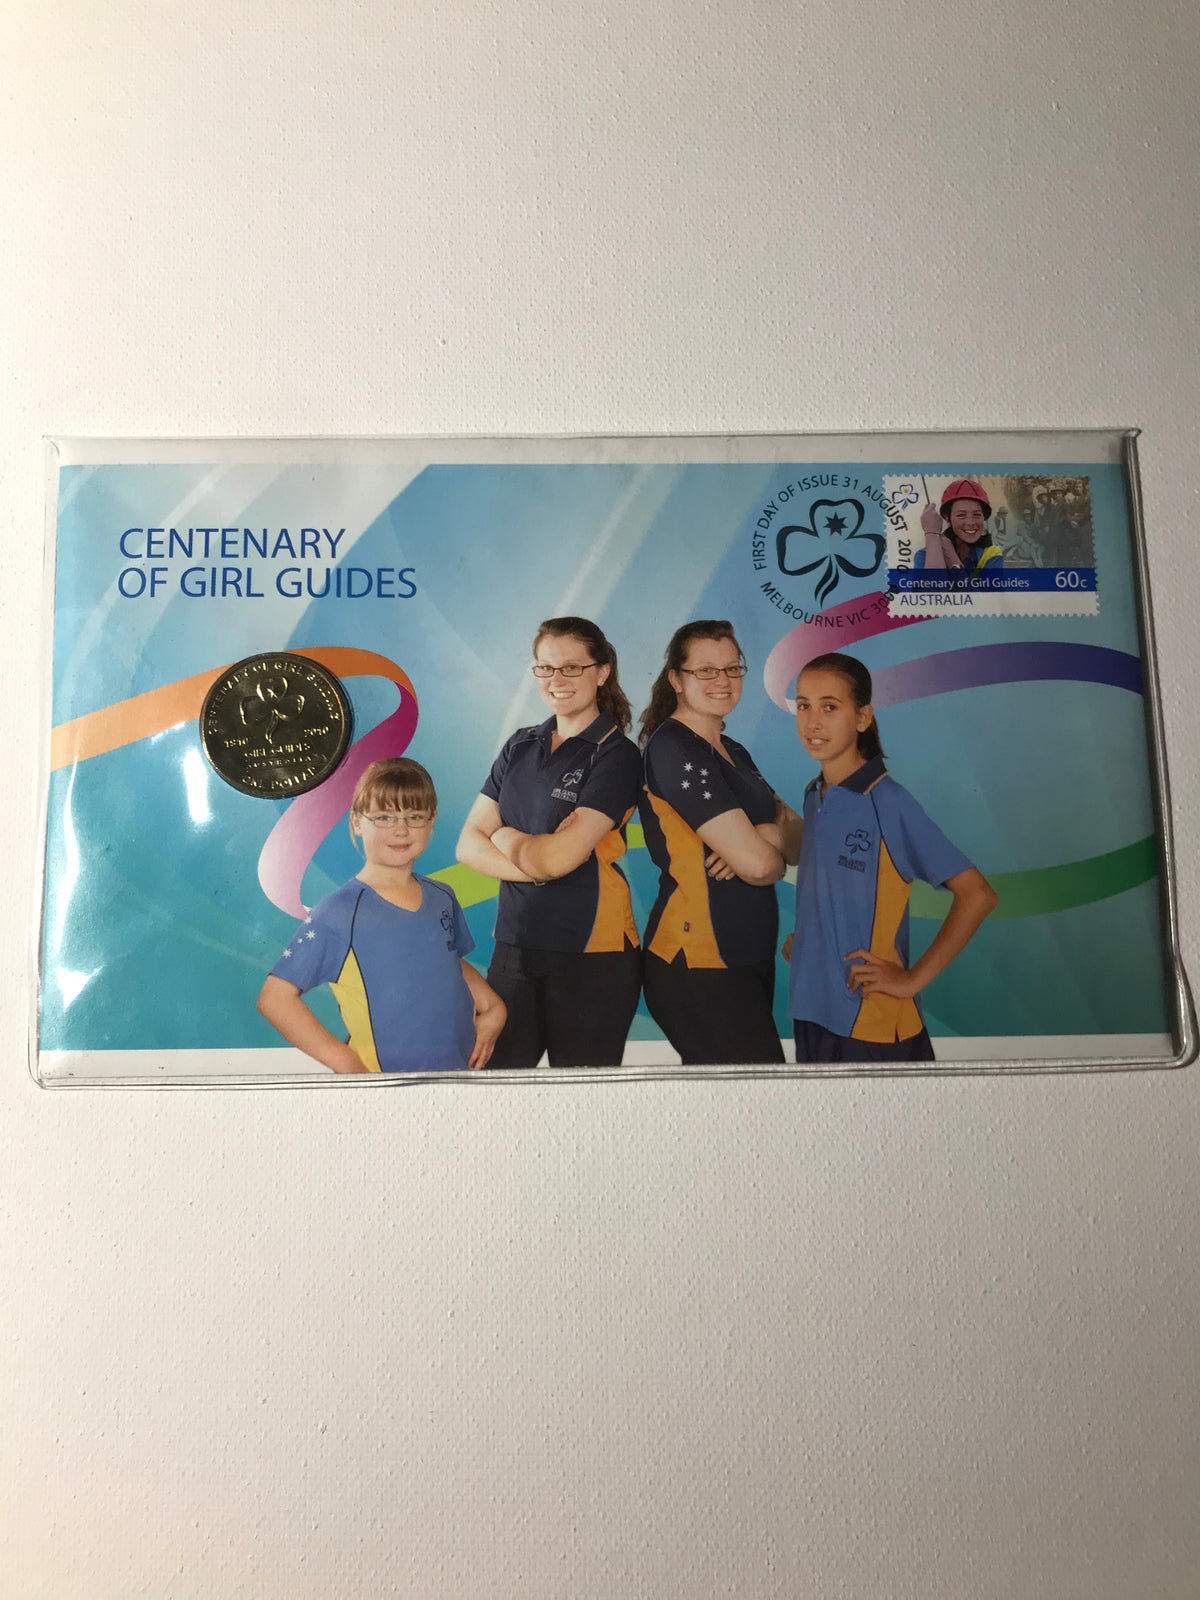 2010 $1 PNC Centenary of Girl Guides